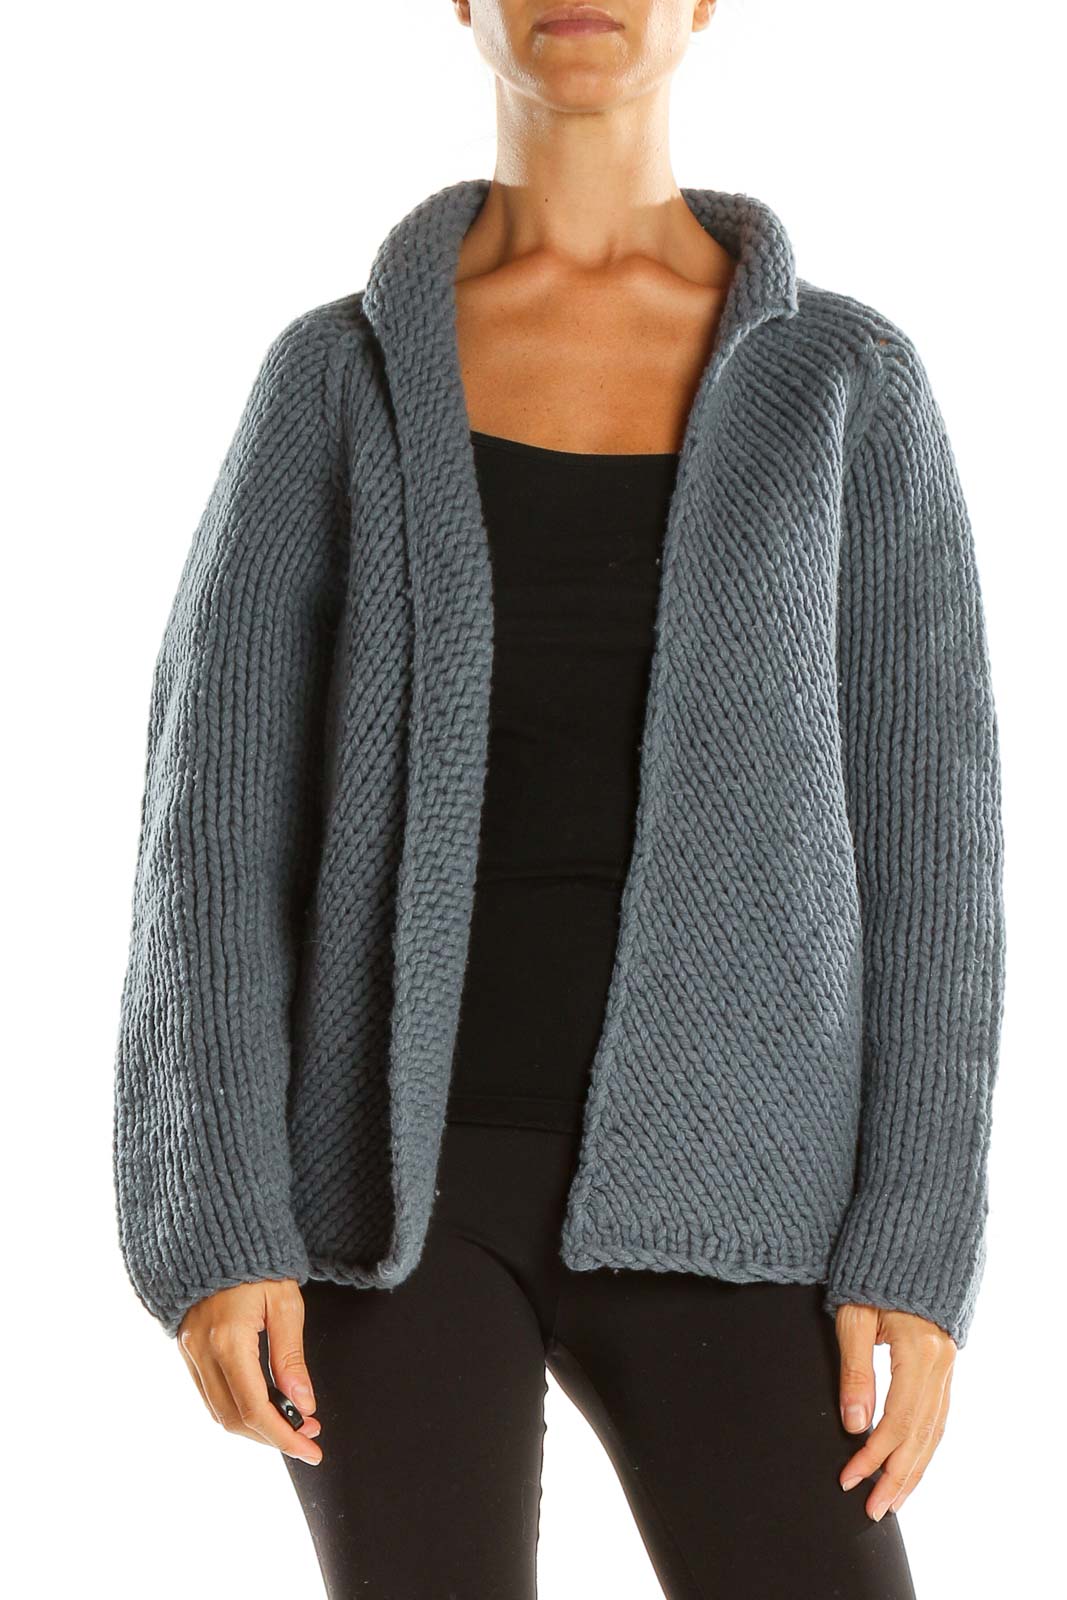 Blue Knit Cardigan Front